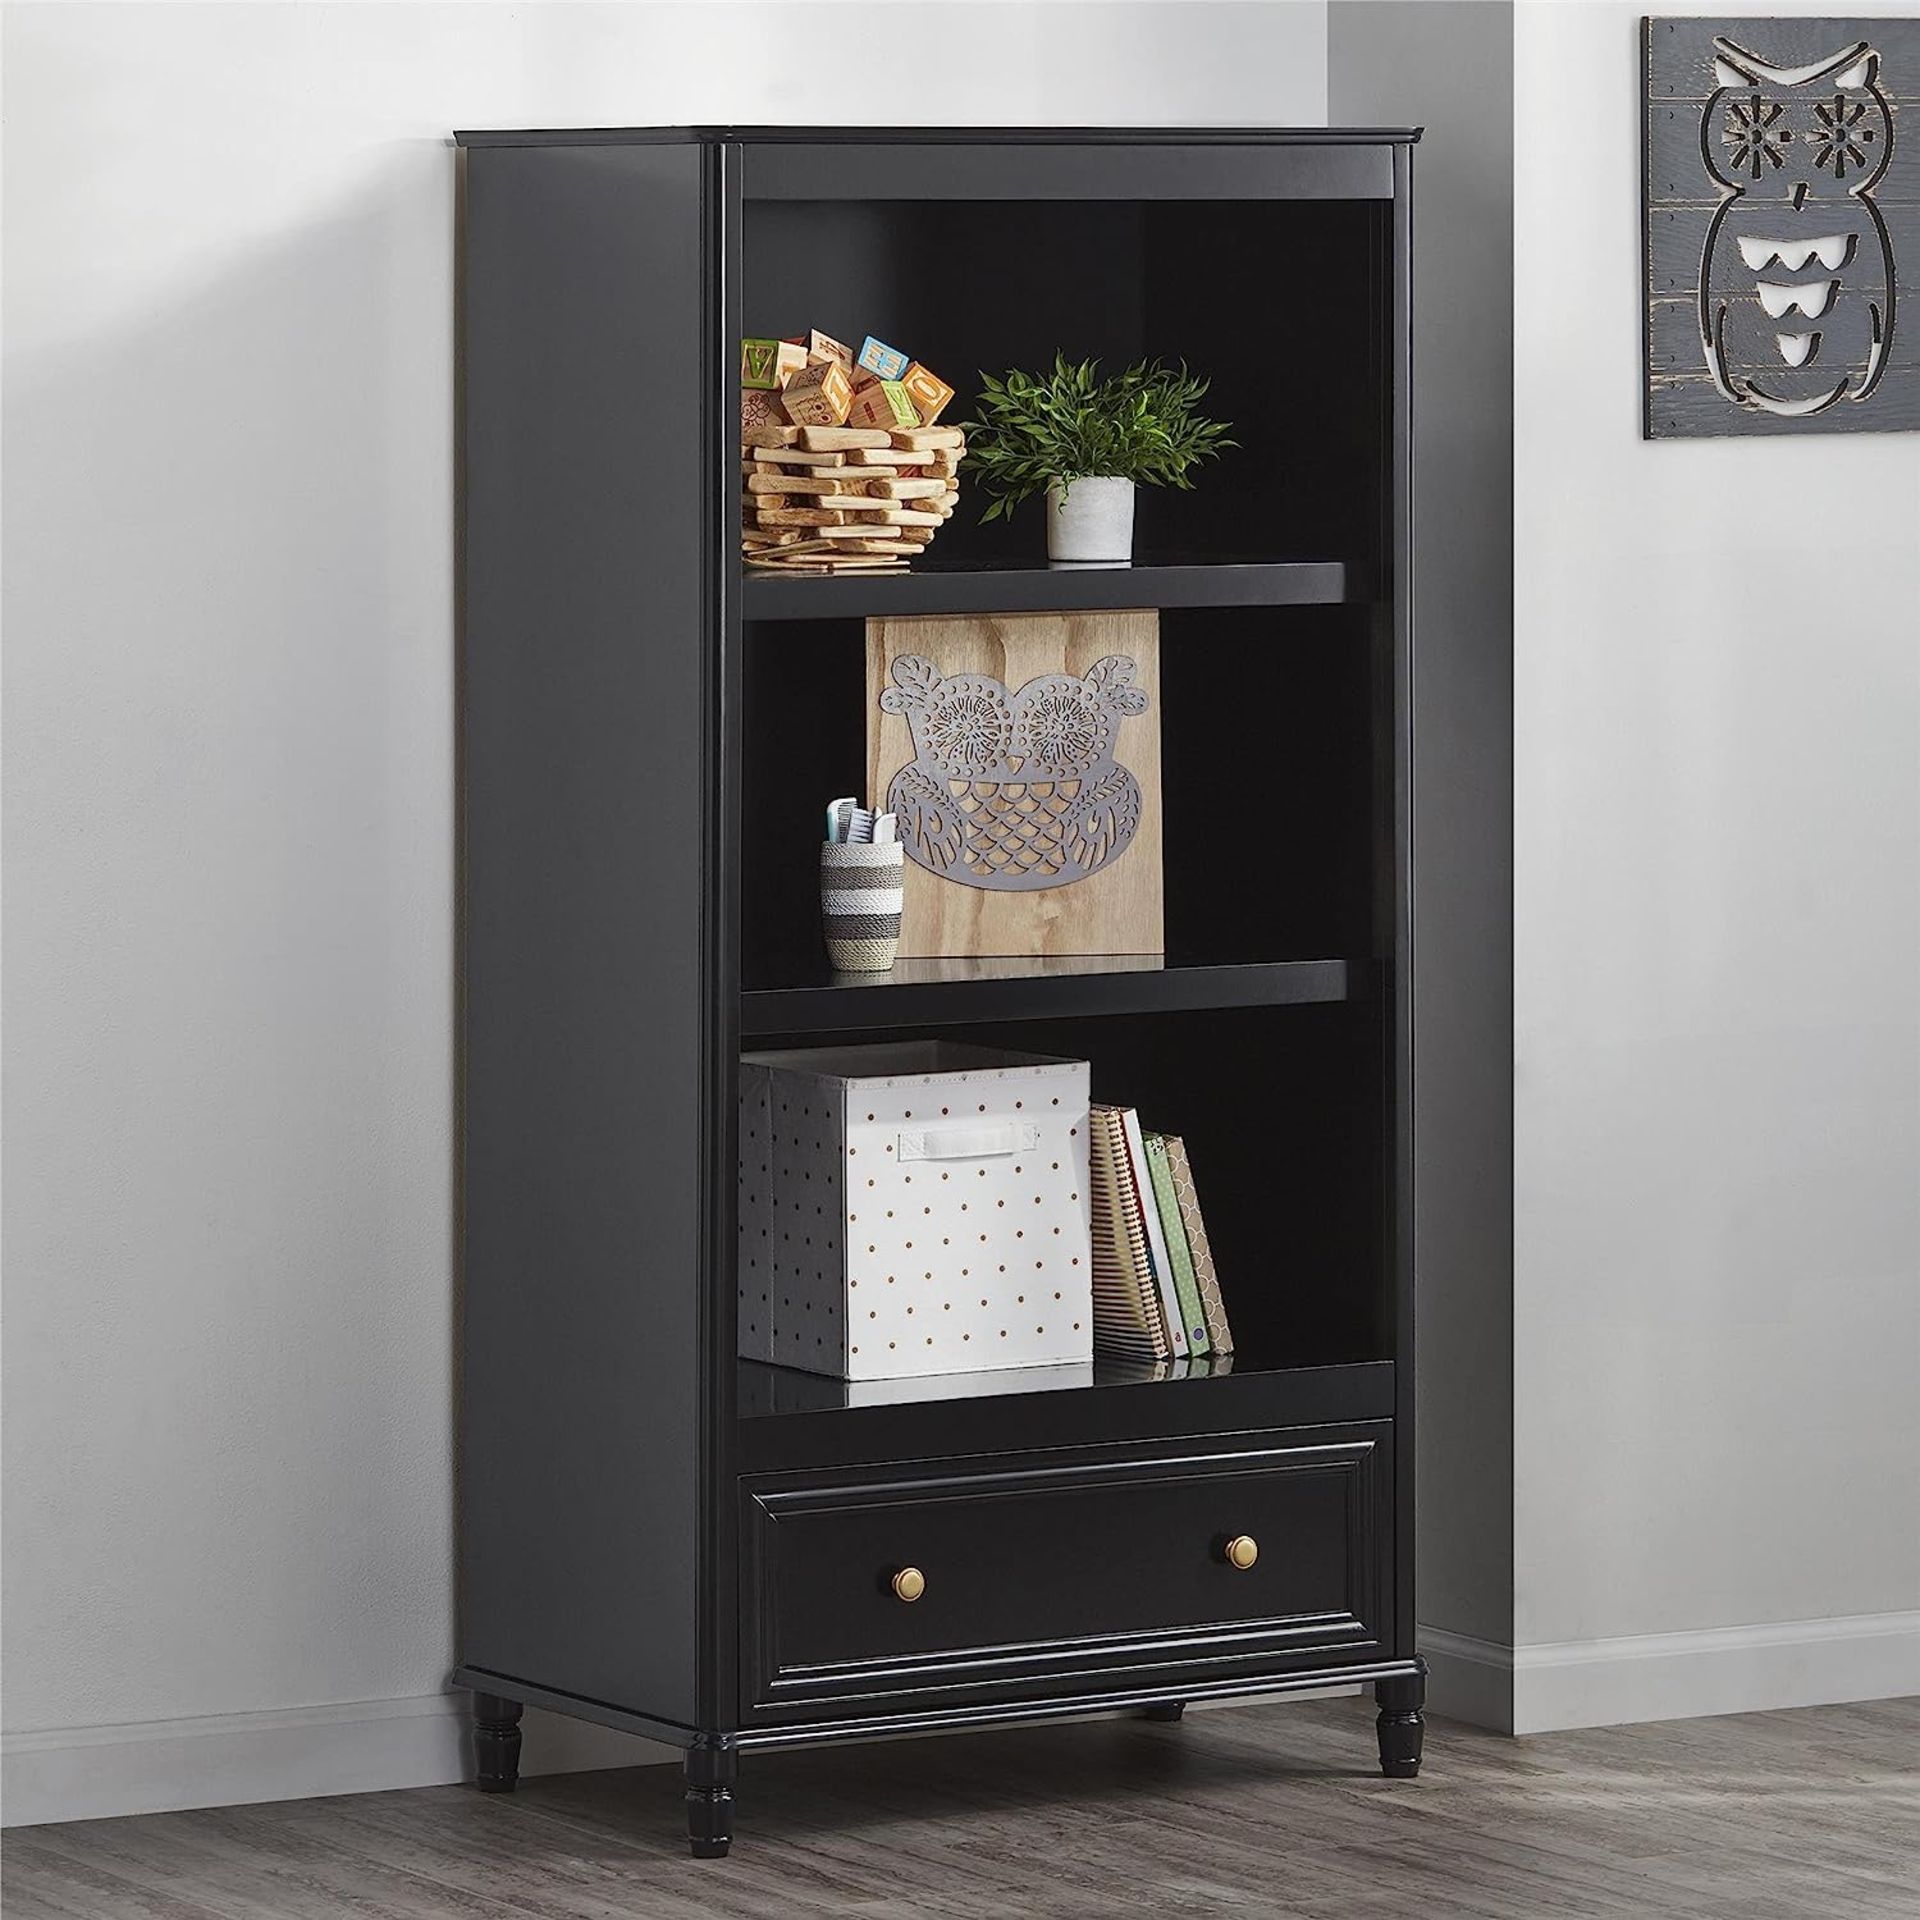 BRAND NEW BLACK PIPER LUXURY BOOKCASE WITH DRAWER RRP £219 (EFF) 6857096BRUUK. Keep your favorite